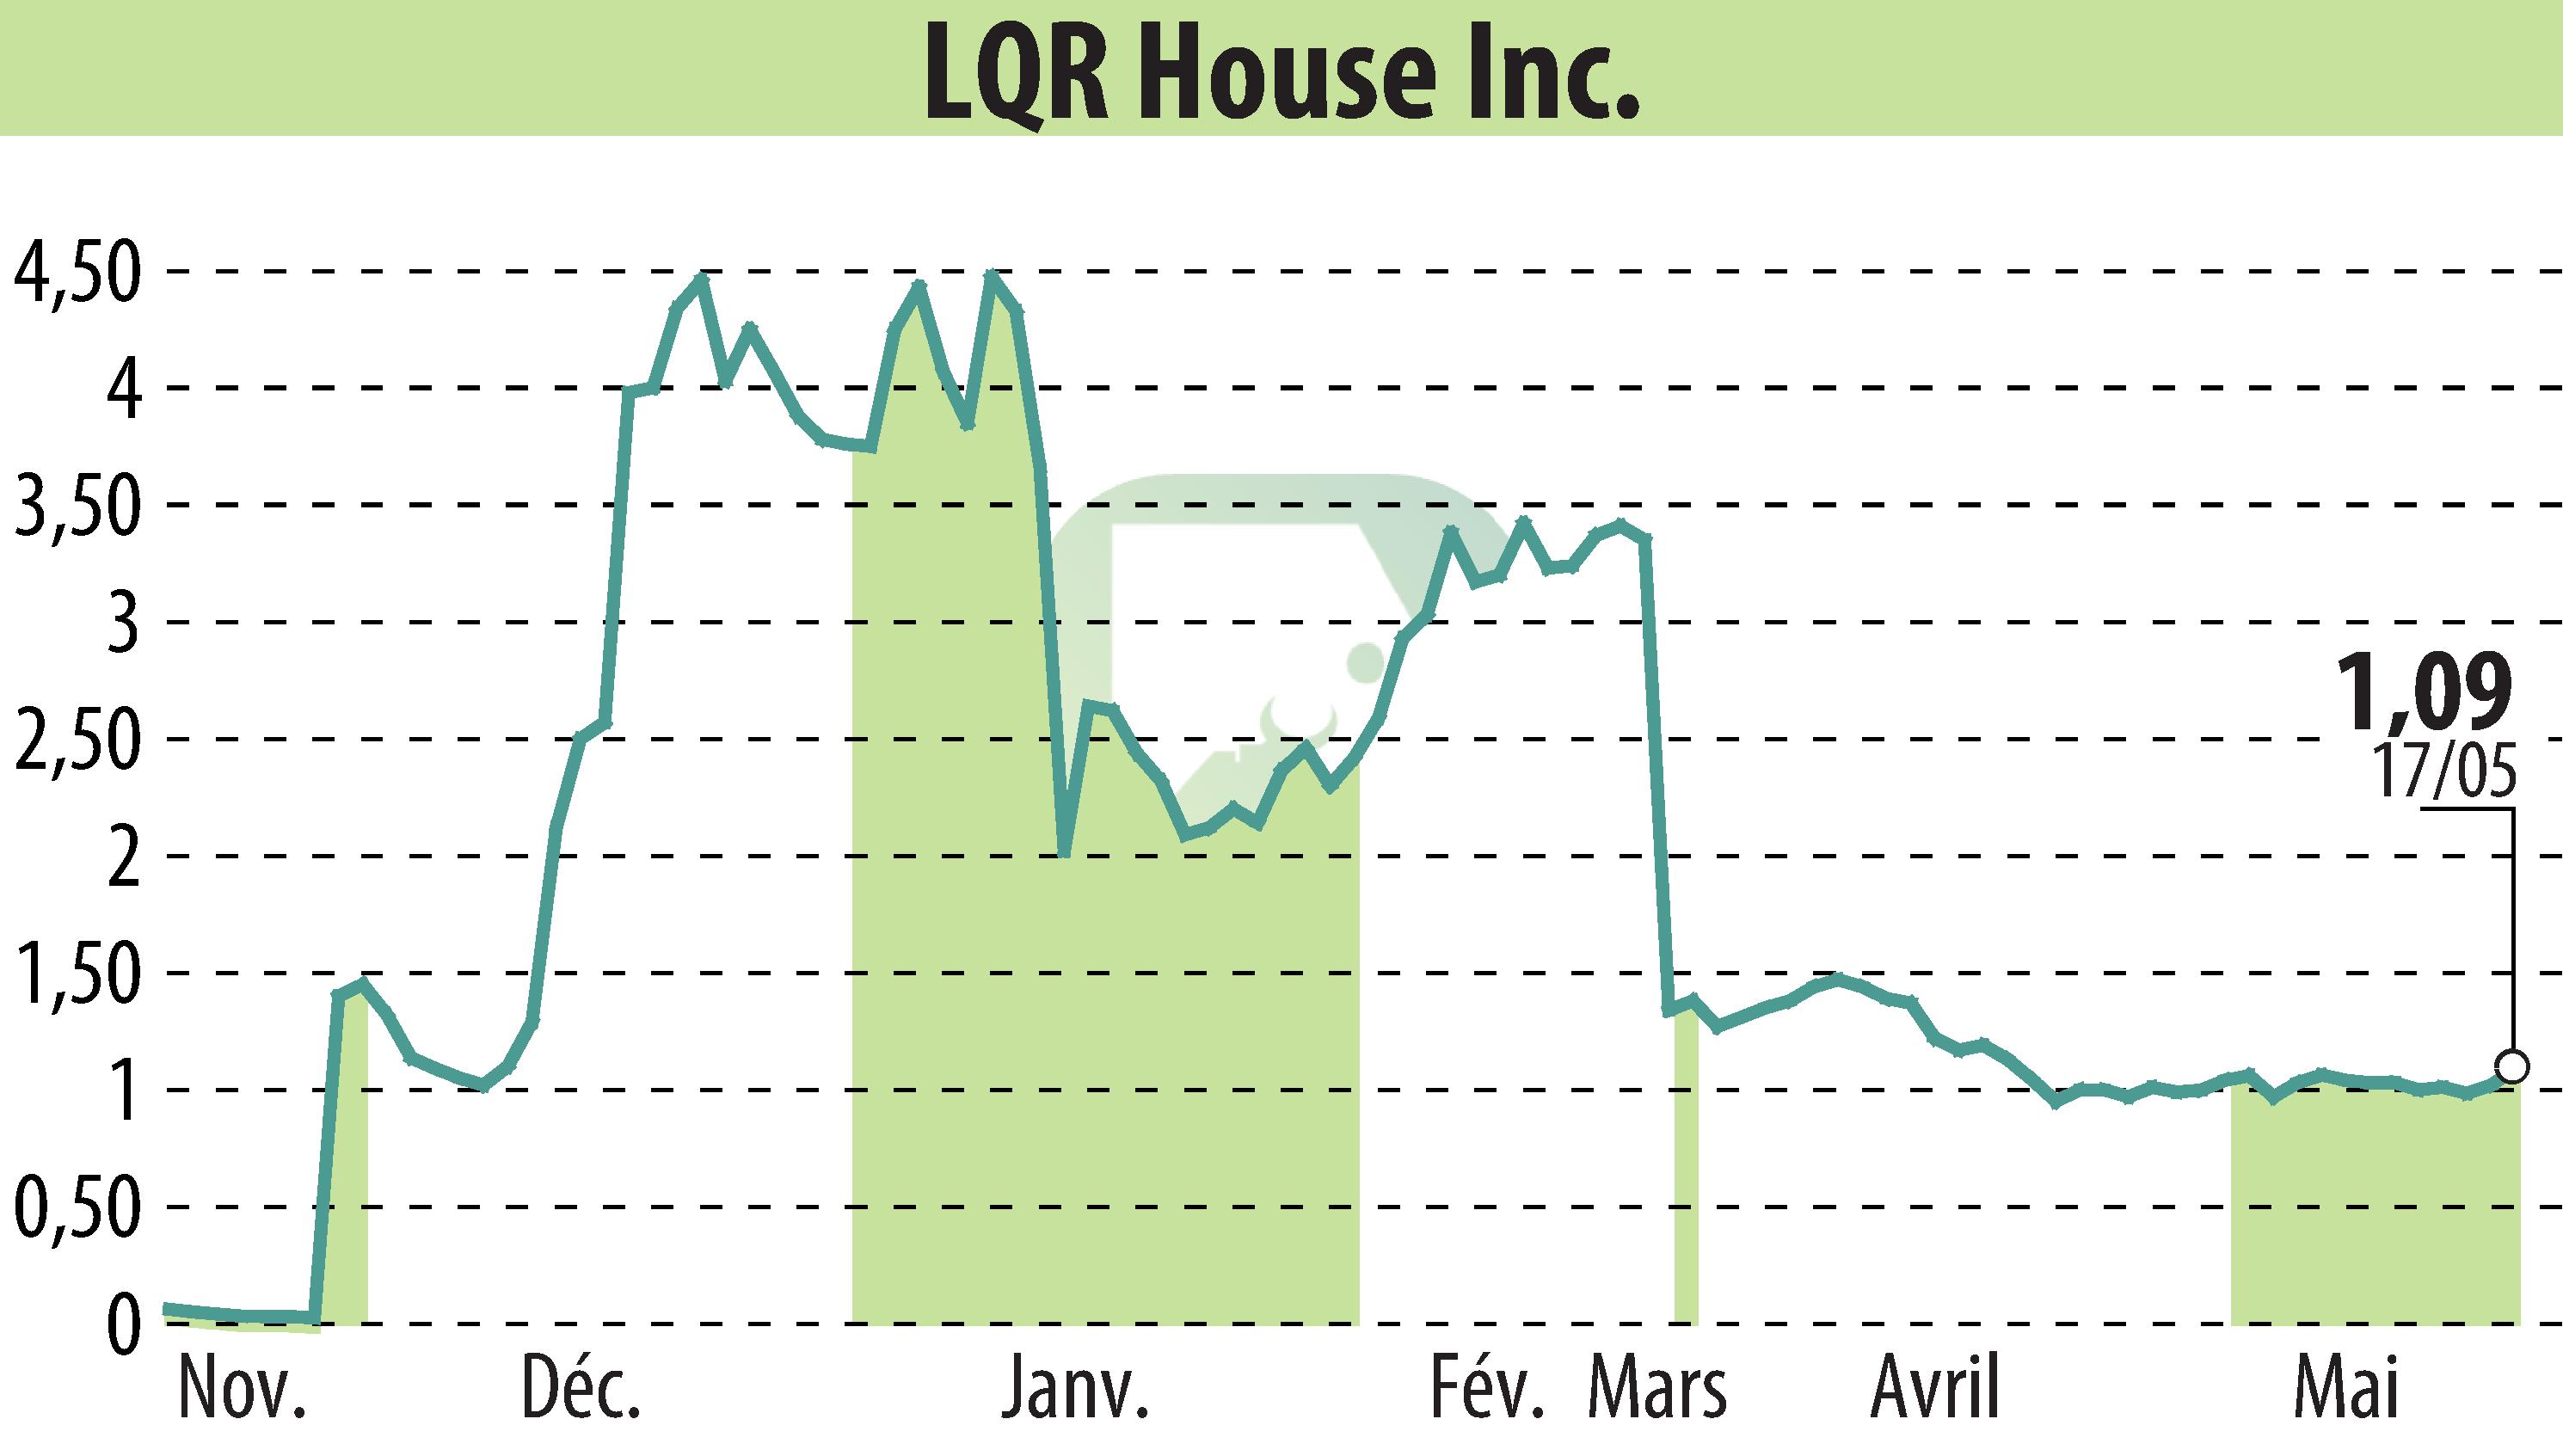 Stock price chart of LQR House Inc. (EBR:LQR) showing fluctuations.